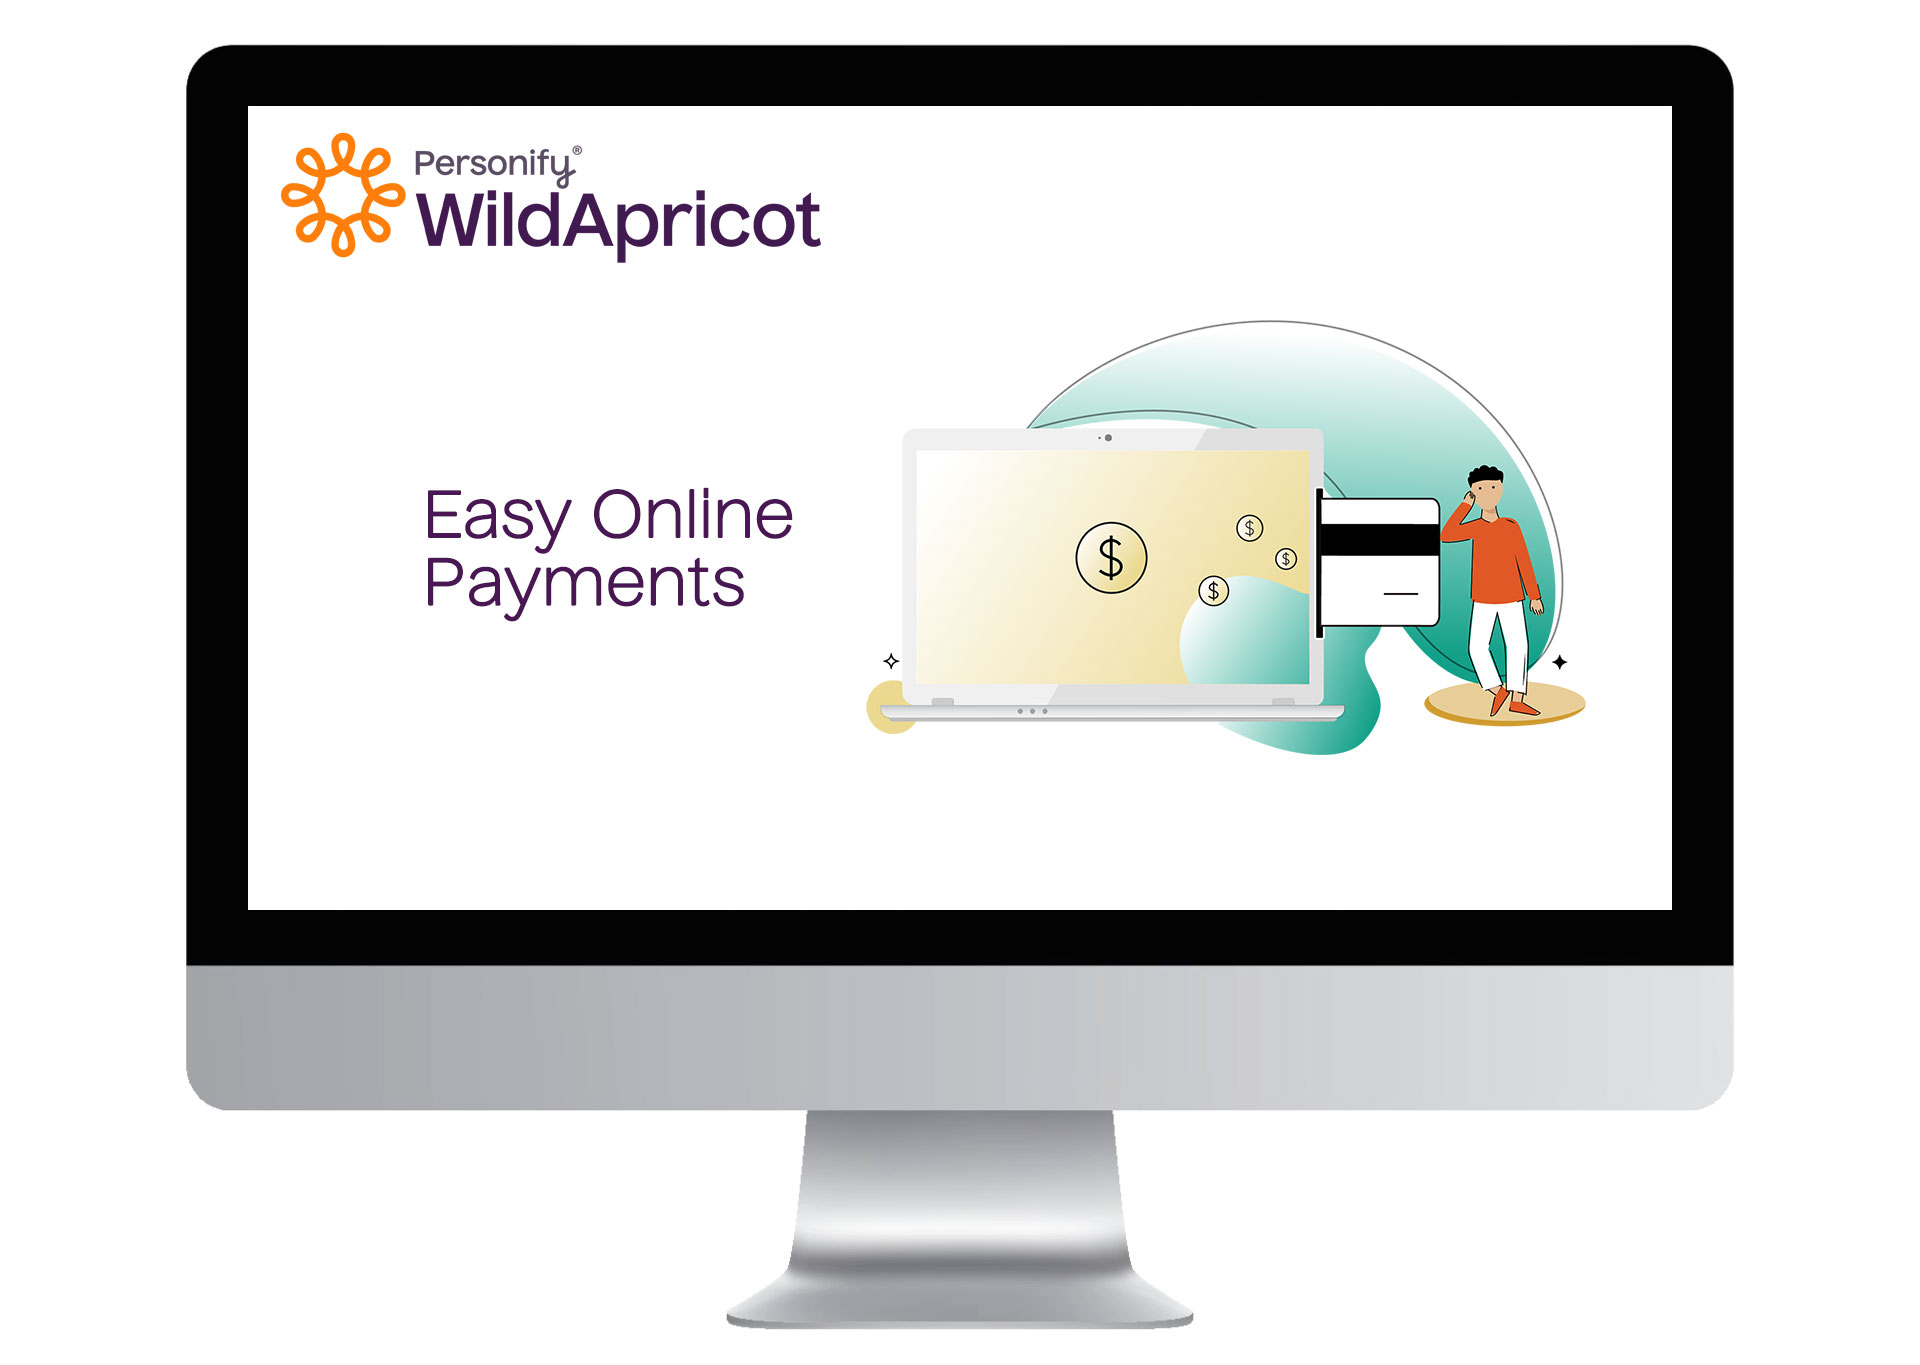 Online Payments: Take payments quickly and securely; Your members and supporters can pay online from their computer or mobile device for membership fees, registration fees, and donations, or set up recurring payments to save time and hassle.